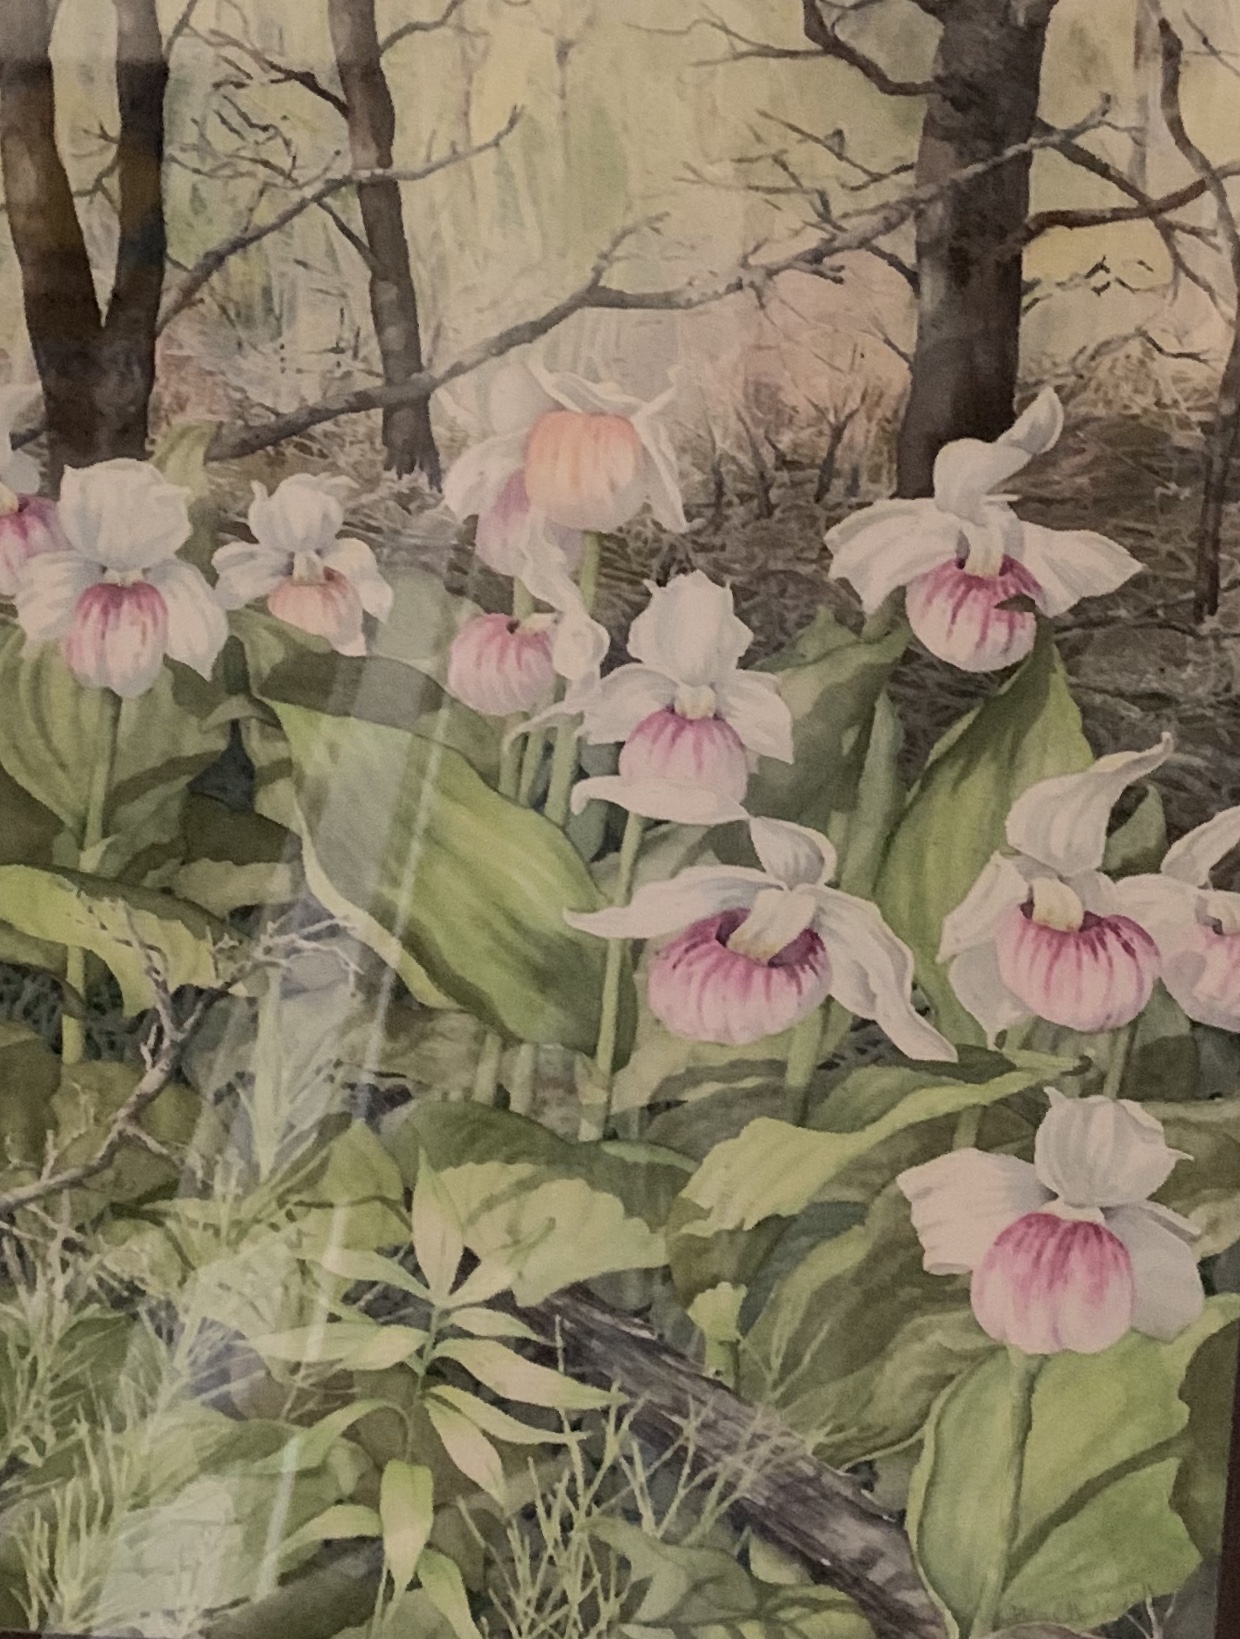 Watercolor painting inspired by nature by Local Michigan artist